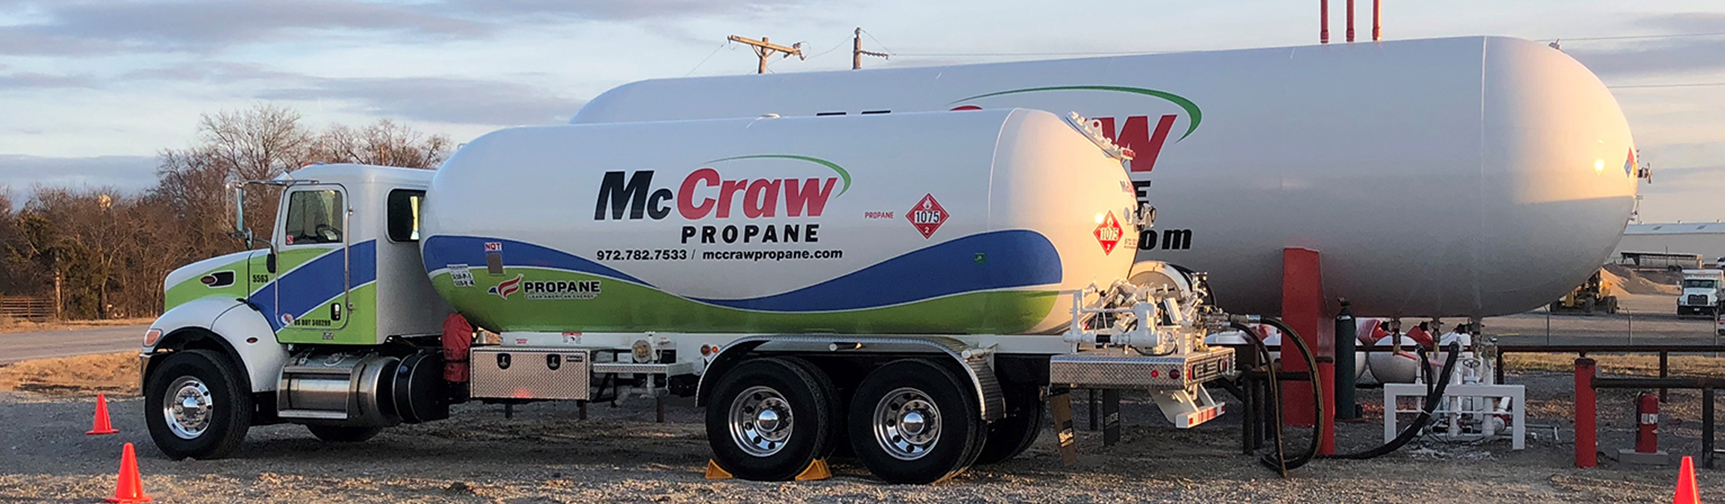 About McCraw Oil and Propane